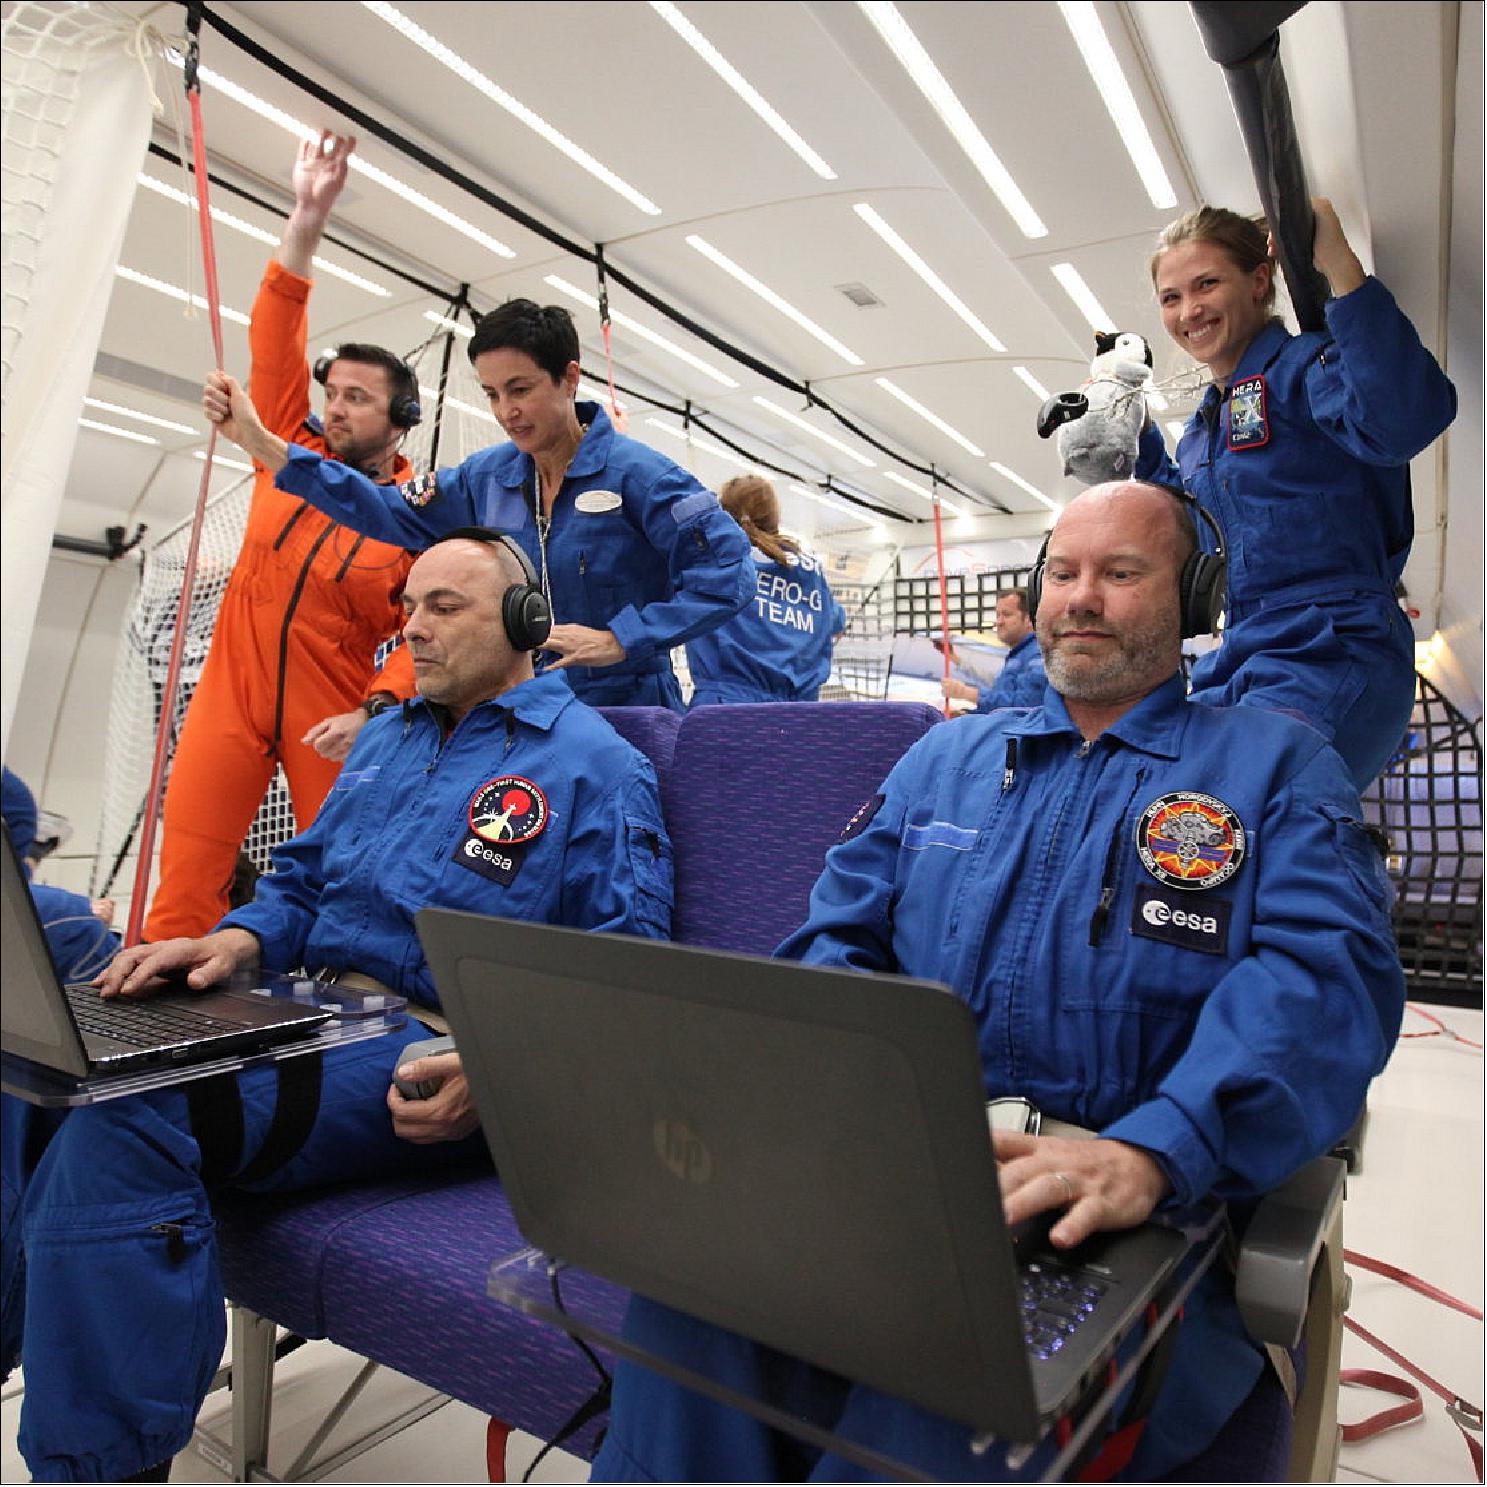 Figure 18: Two candidates test their skills on Computers during a parabolic flight (image credit: Novespace) 17)